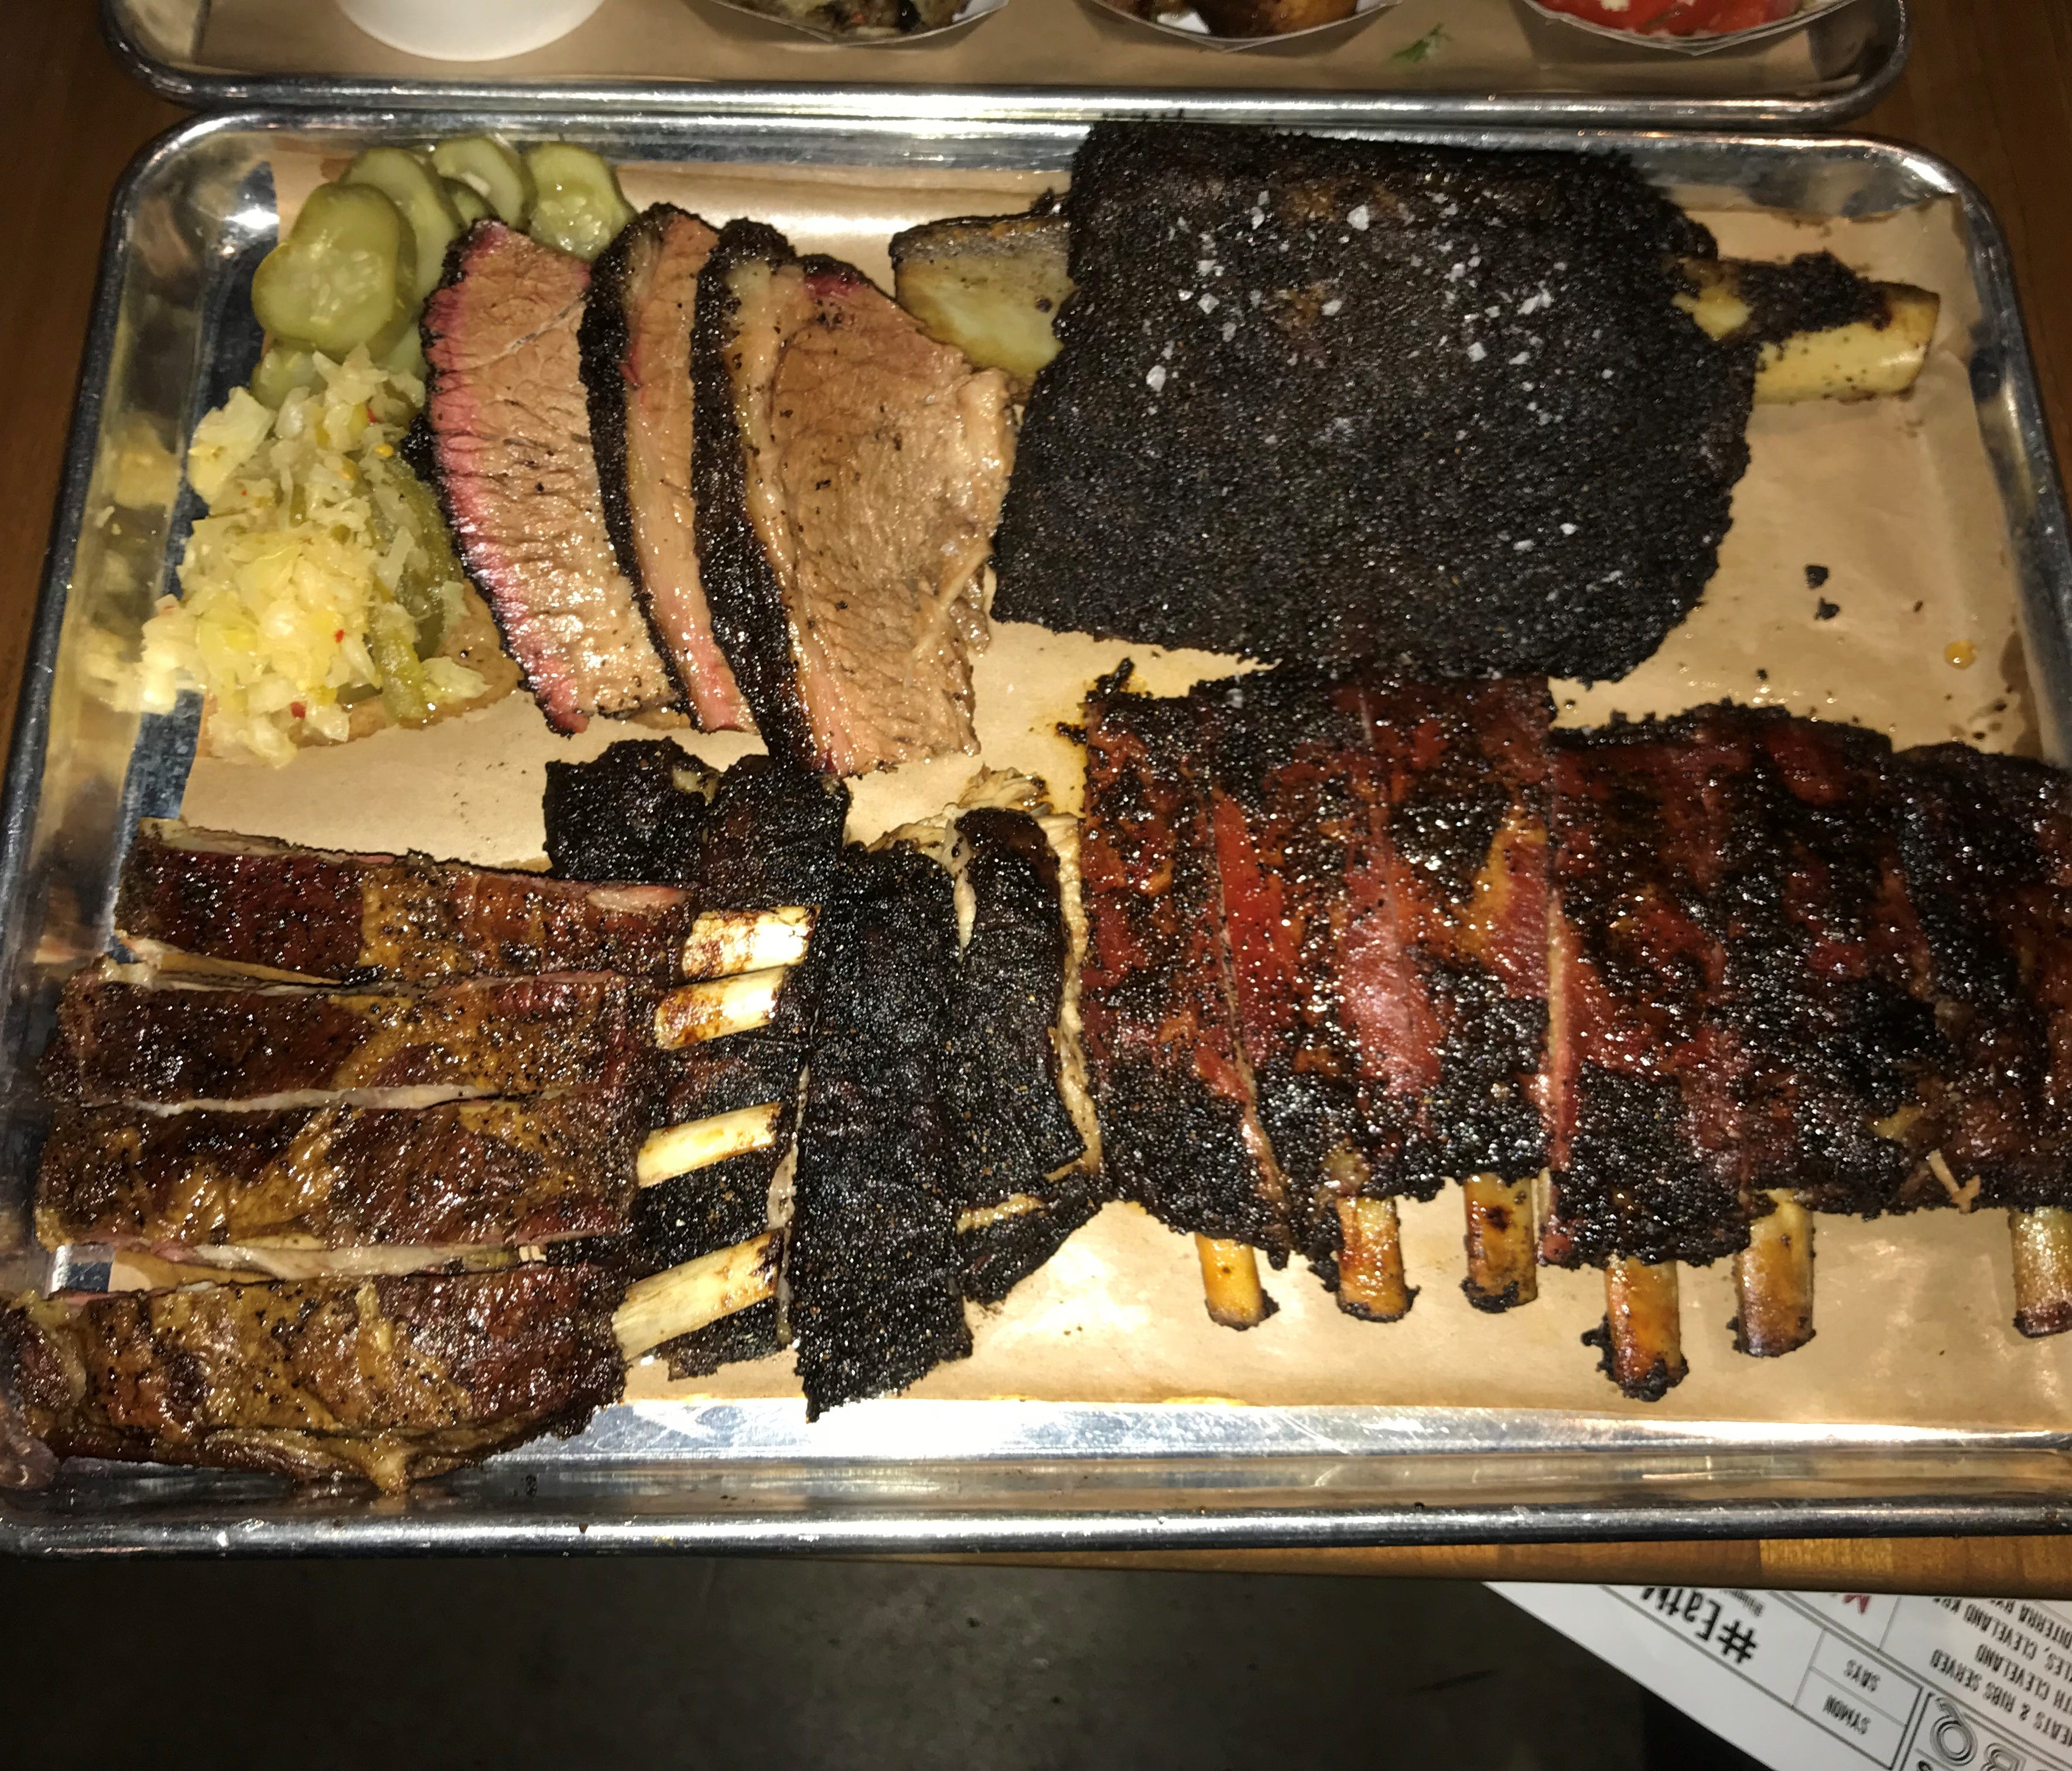 Signature slow-smoked meats include sliced beef brisket, giant beef rib, pork spare ribs, pork belly and lamb ribs (clockwise from upper left).